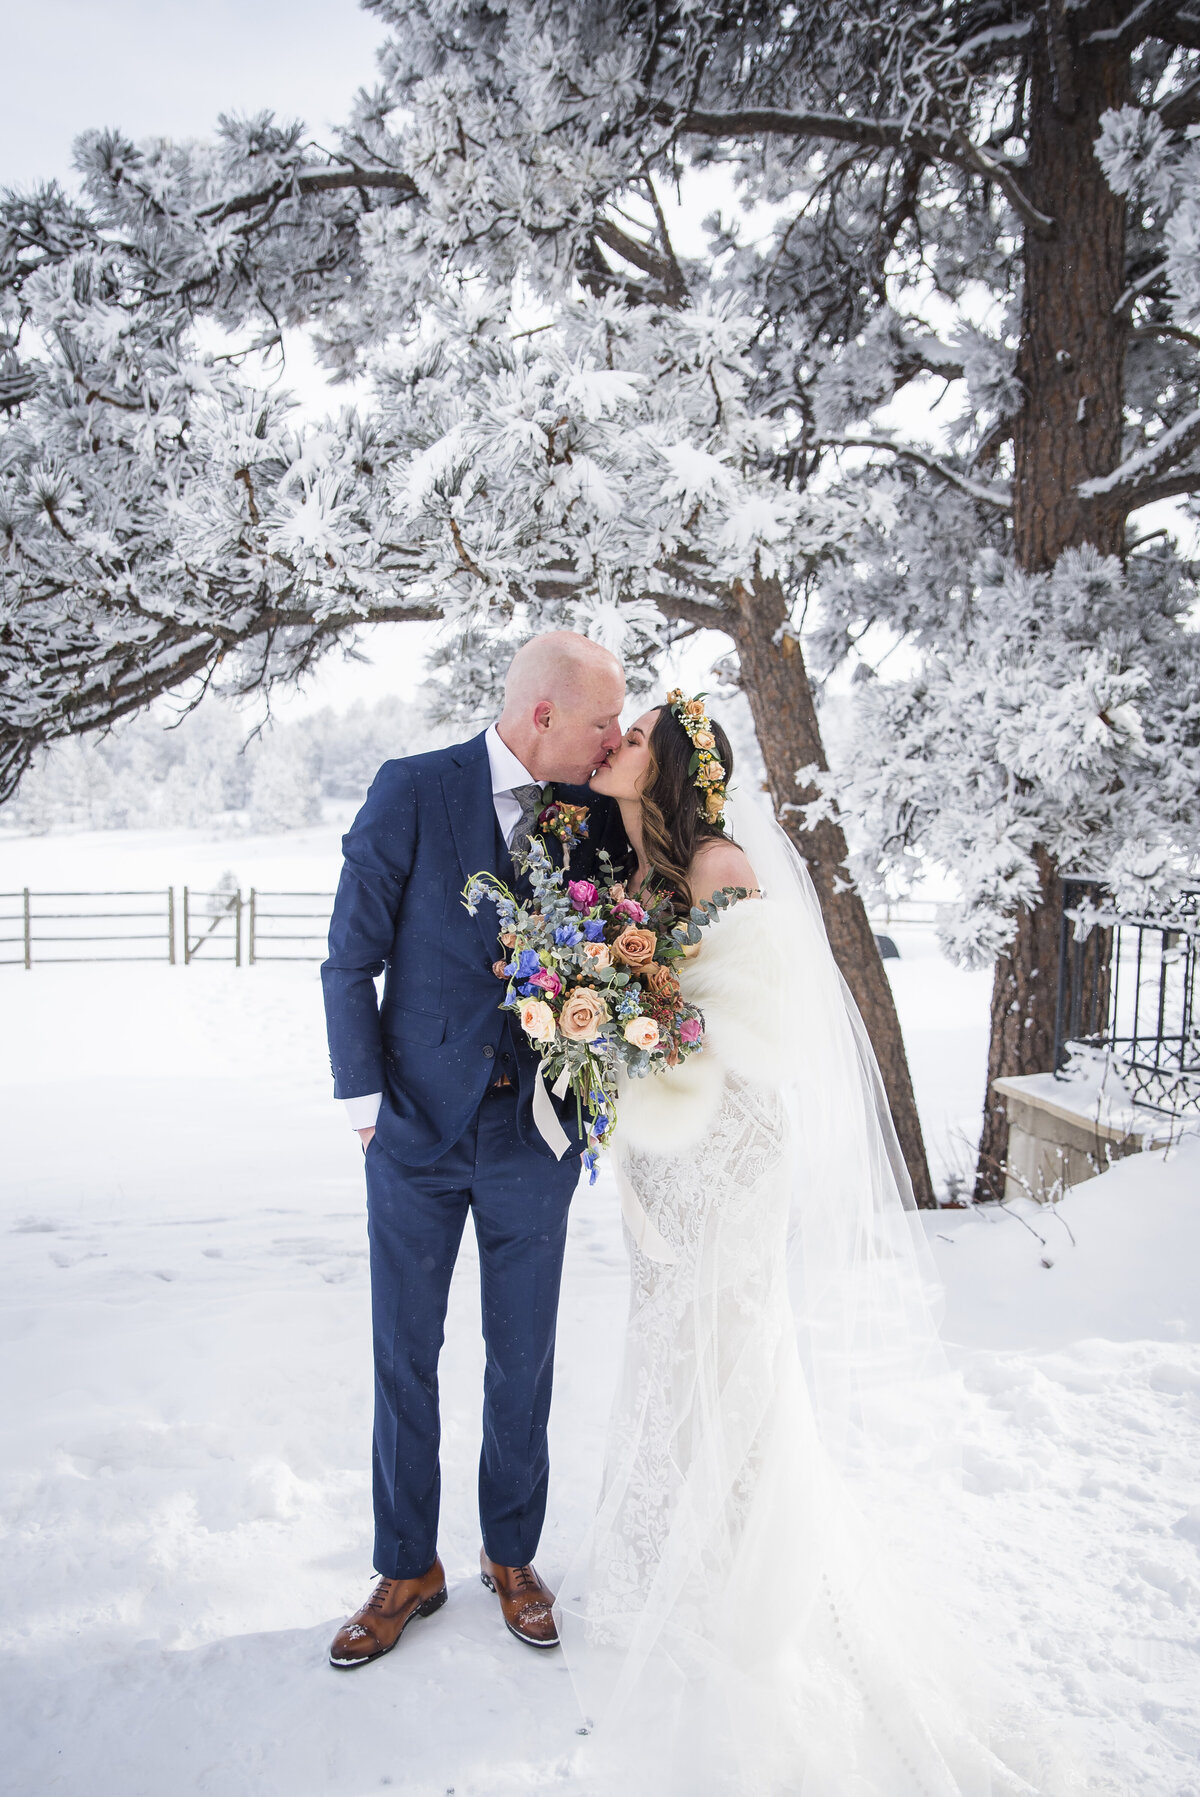 A bride and groom share a kiss in the snow.